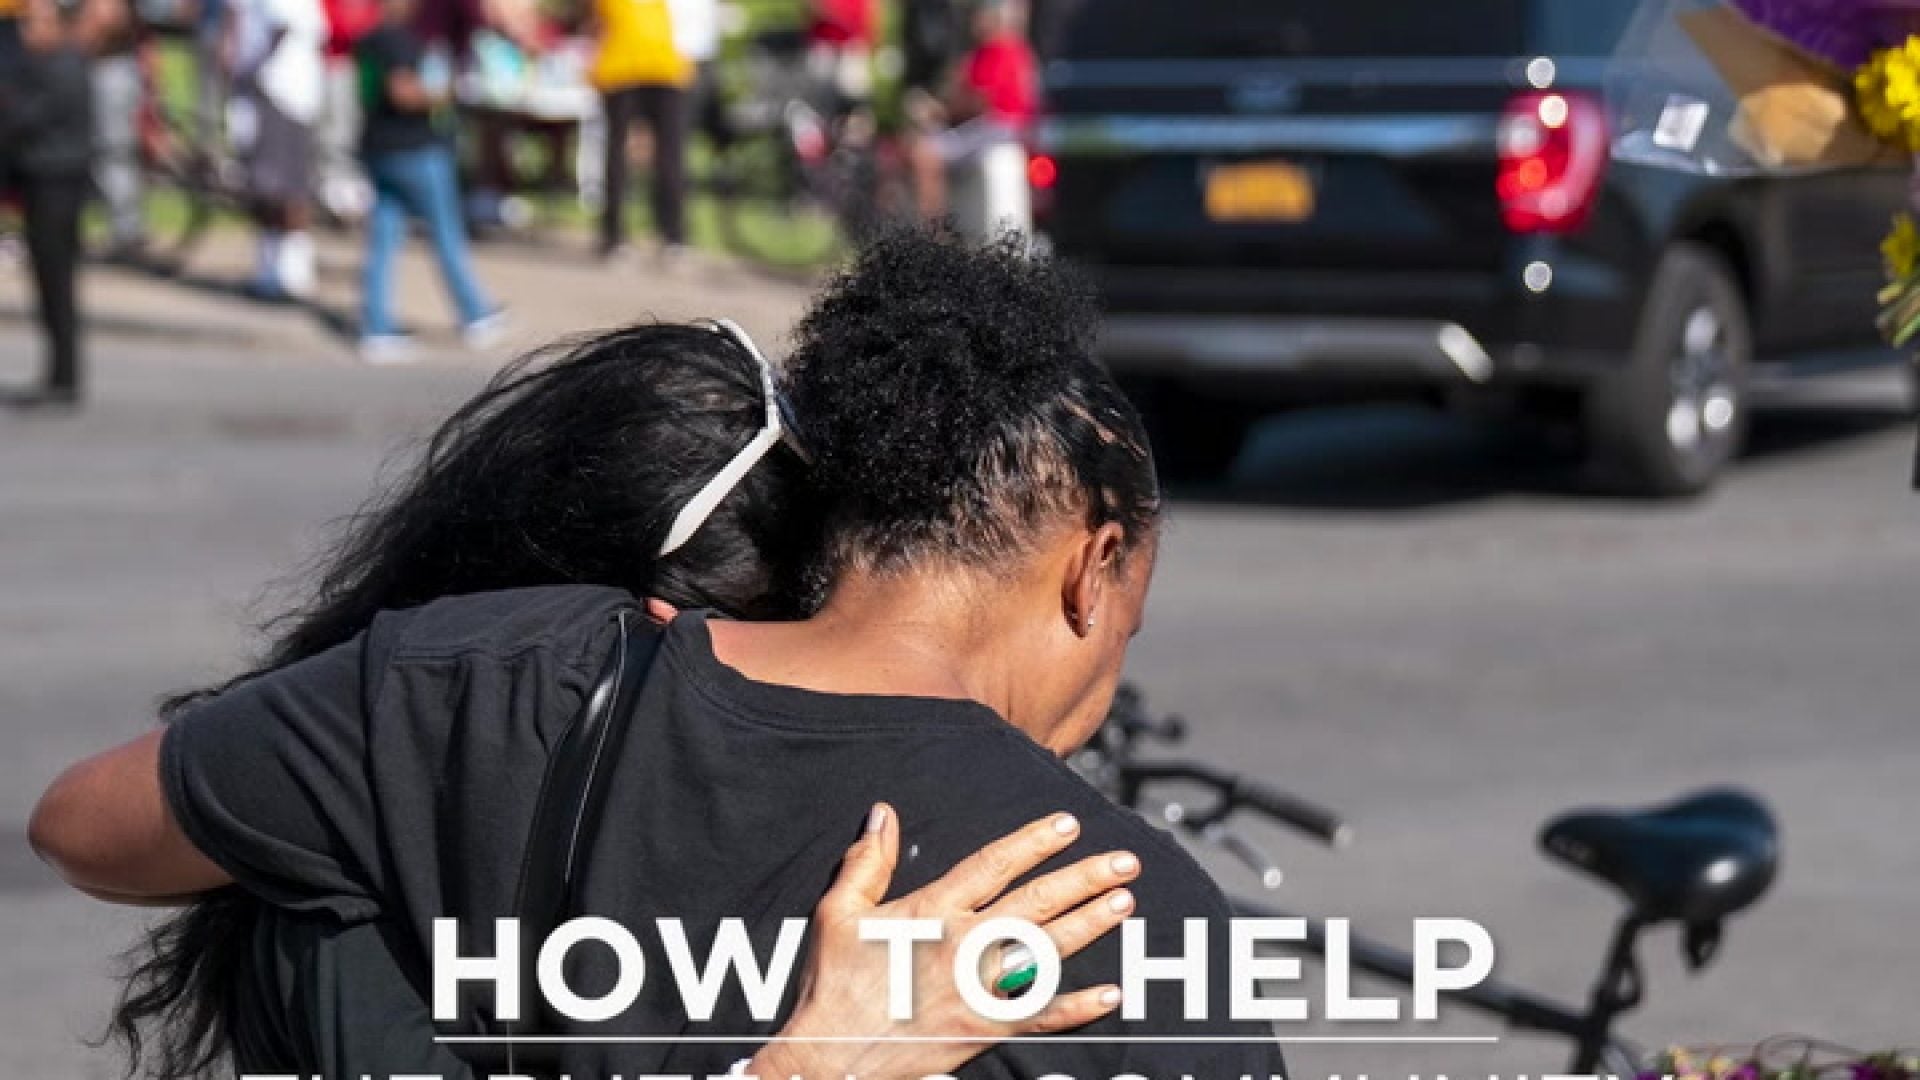 Here’s How To Help The Buffalo Community Is Now In A Food Desert After The Shooting